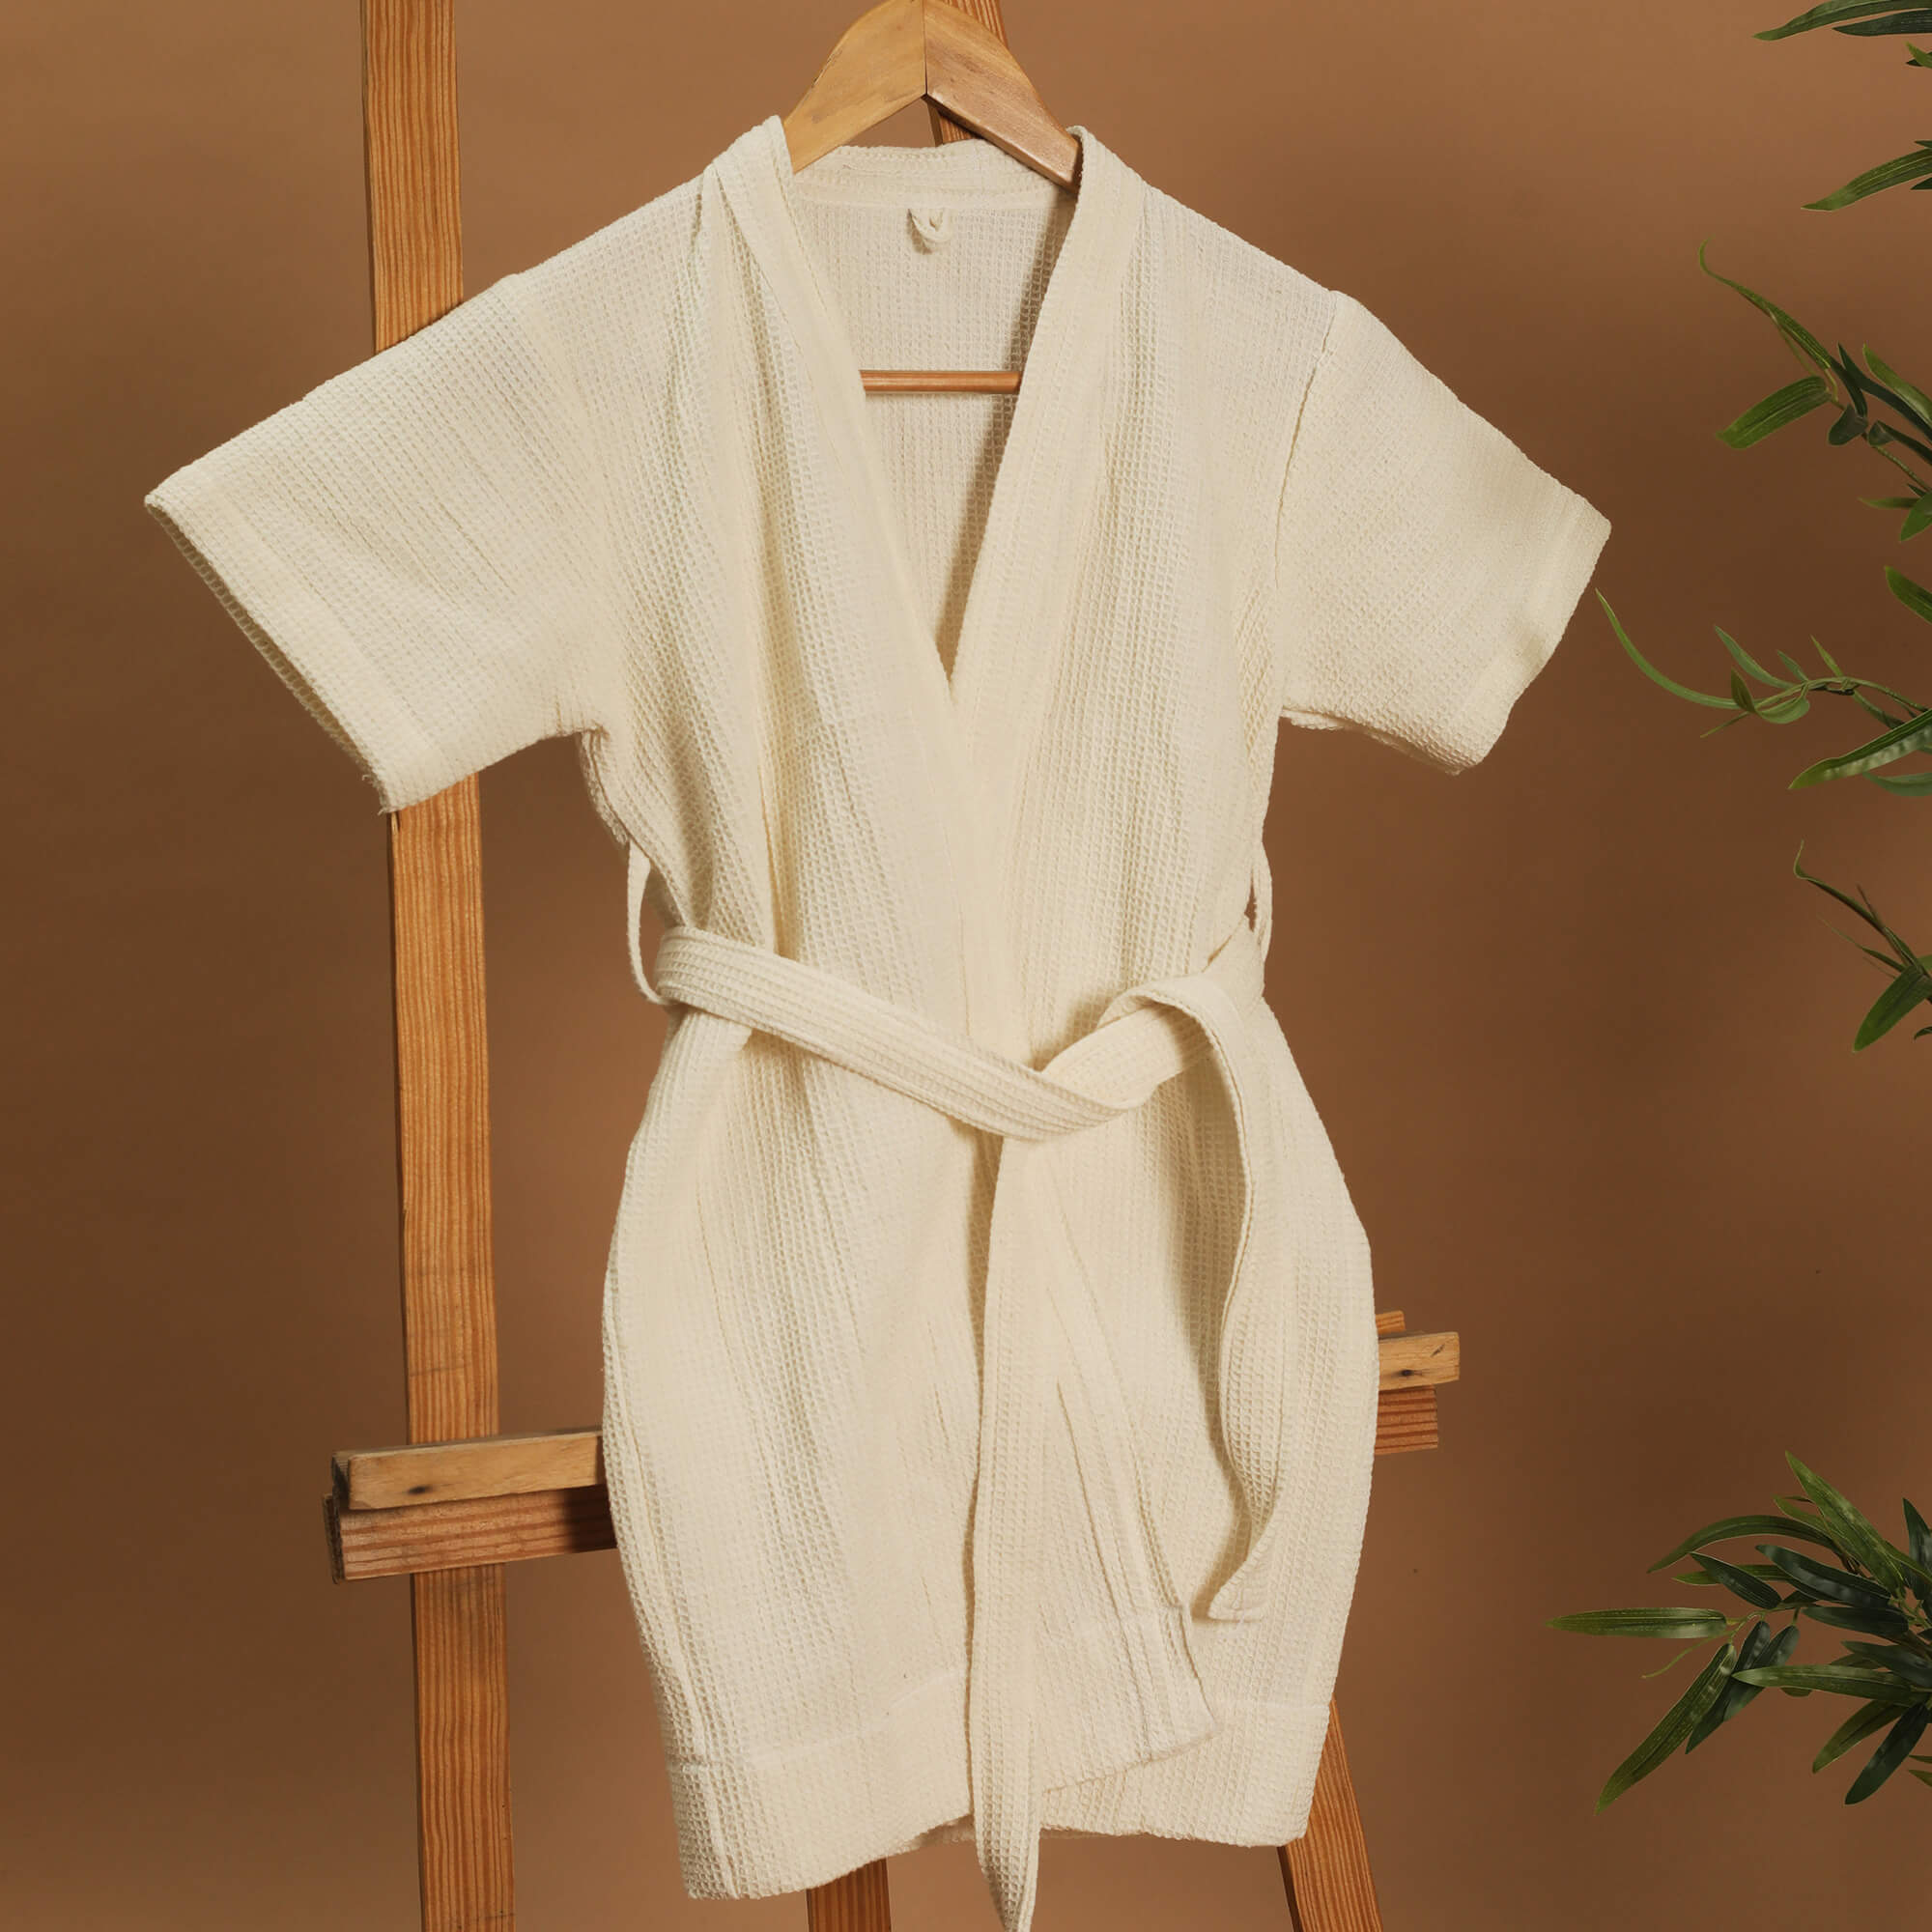 Buy Sheer Linen White Cotton Waffle Bathrobe Online at Low Prices in India  